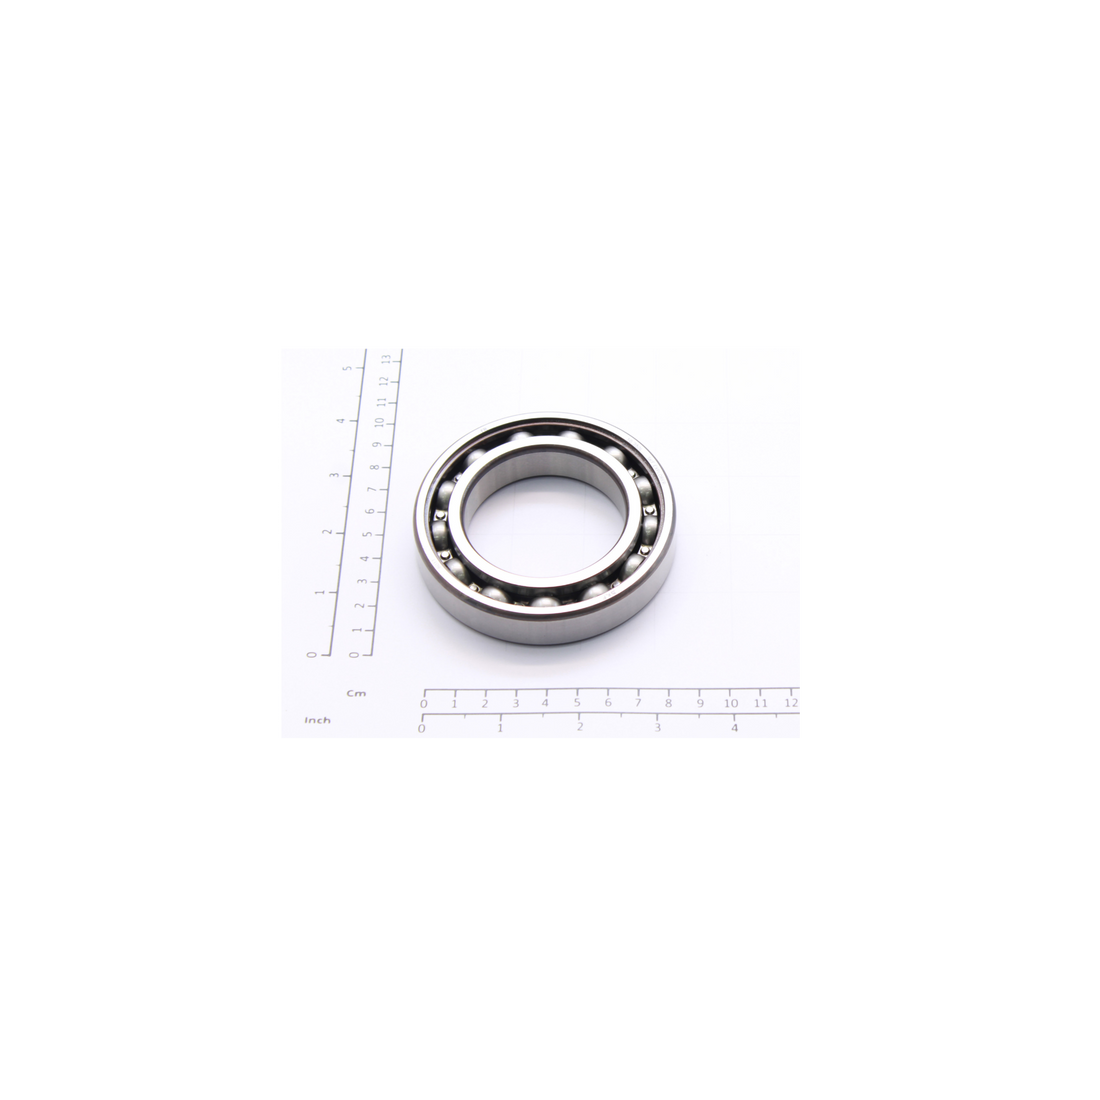 R&M Parts - Deep Groove Ball Bearing, Part Number: 52001016